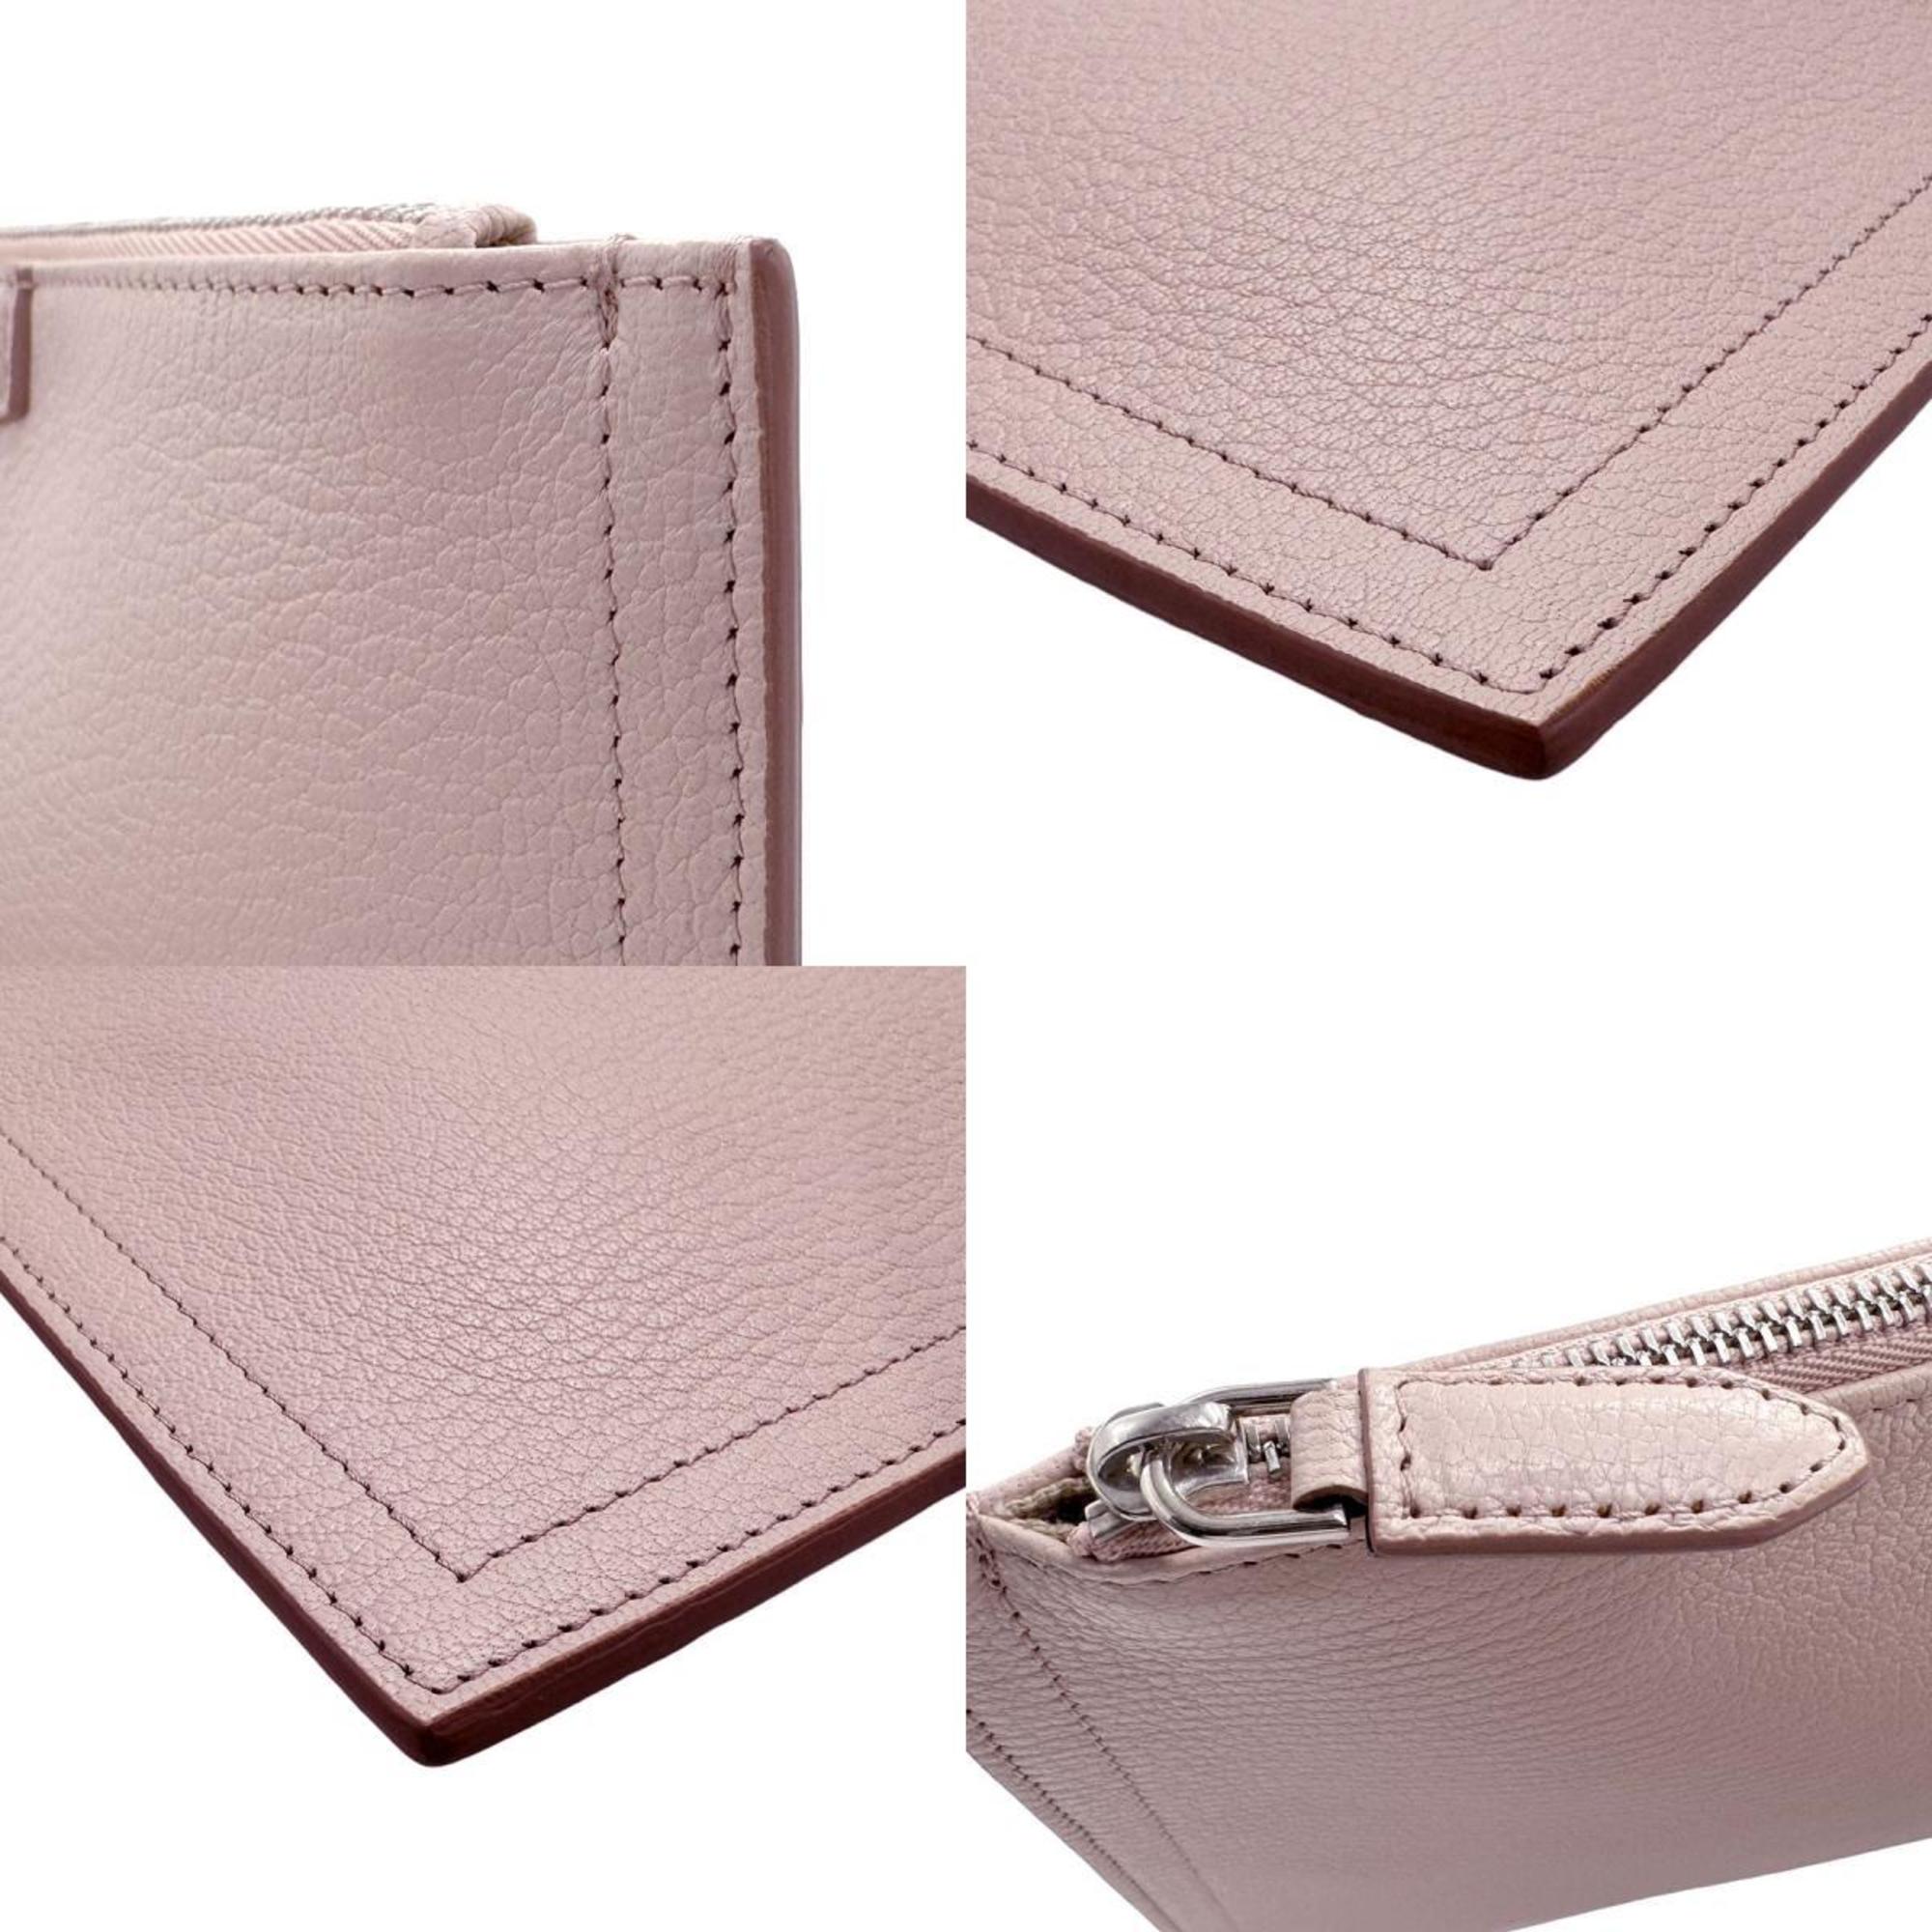 Givenchy clutch bag pouch leather light pink silver women's z1559